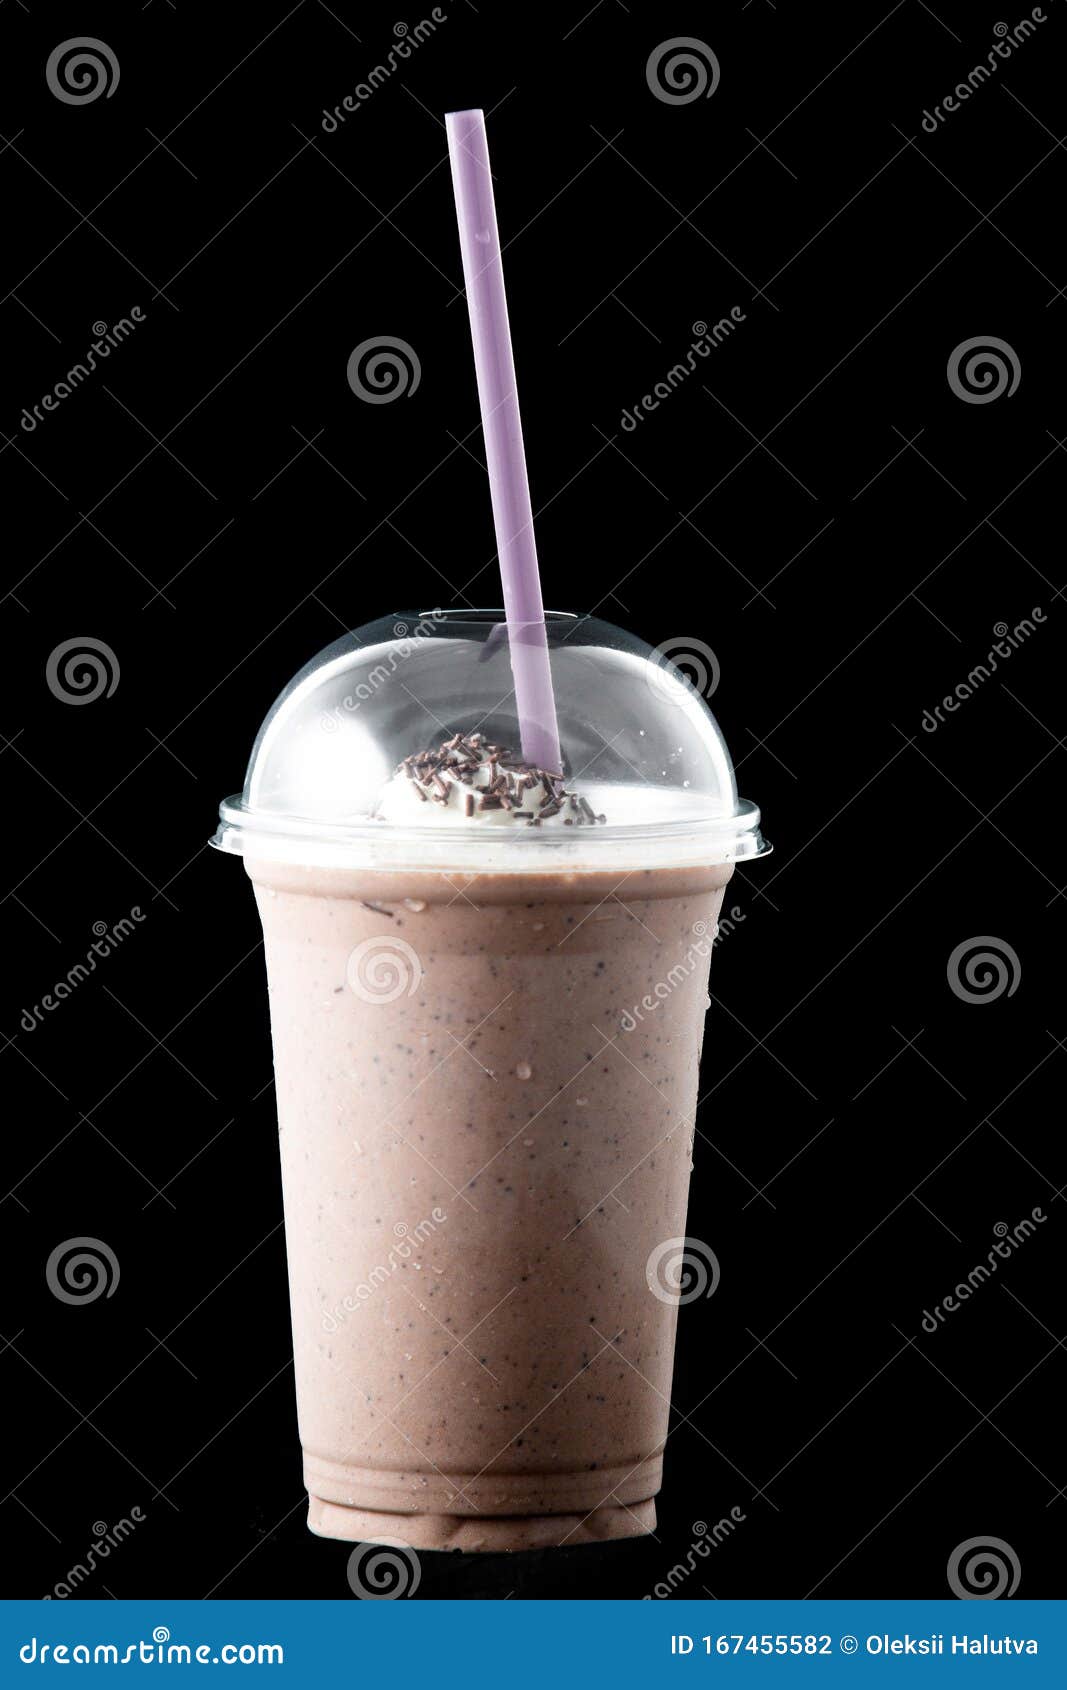 Chocolate milk shake milkshake straw in a cup isolated on white